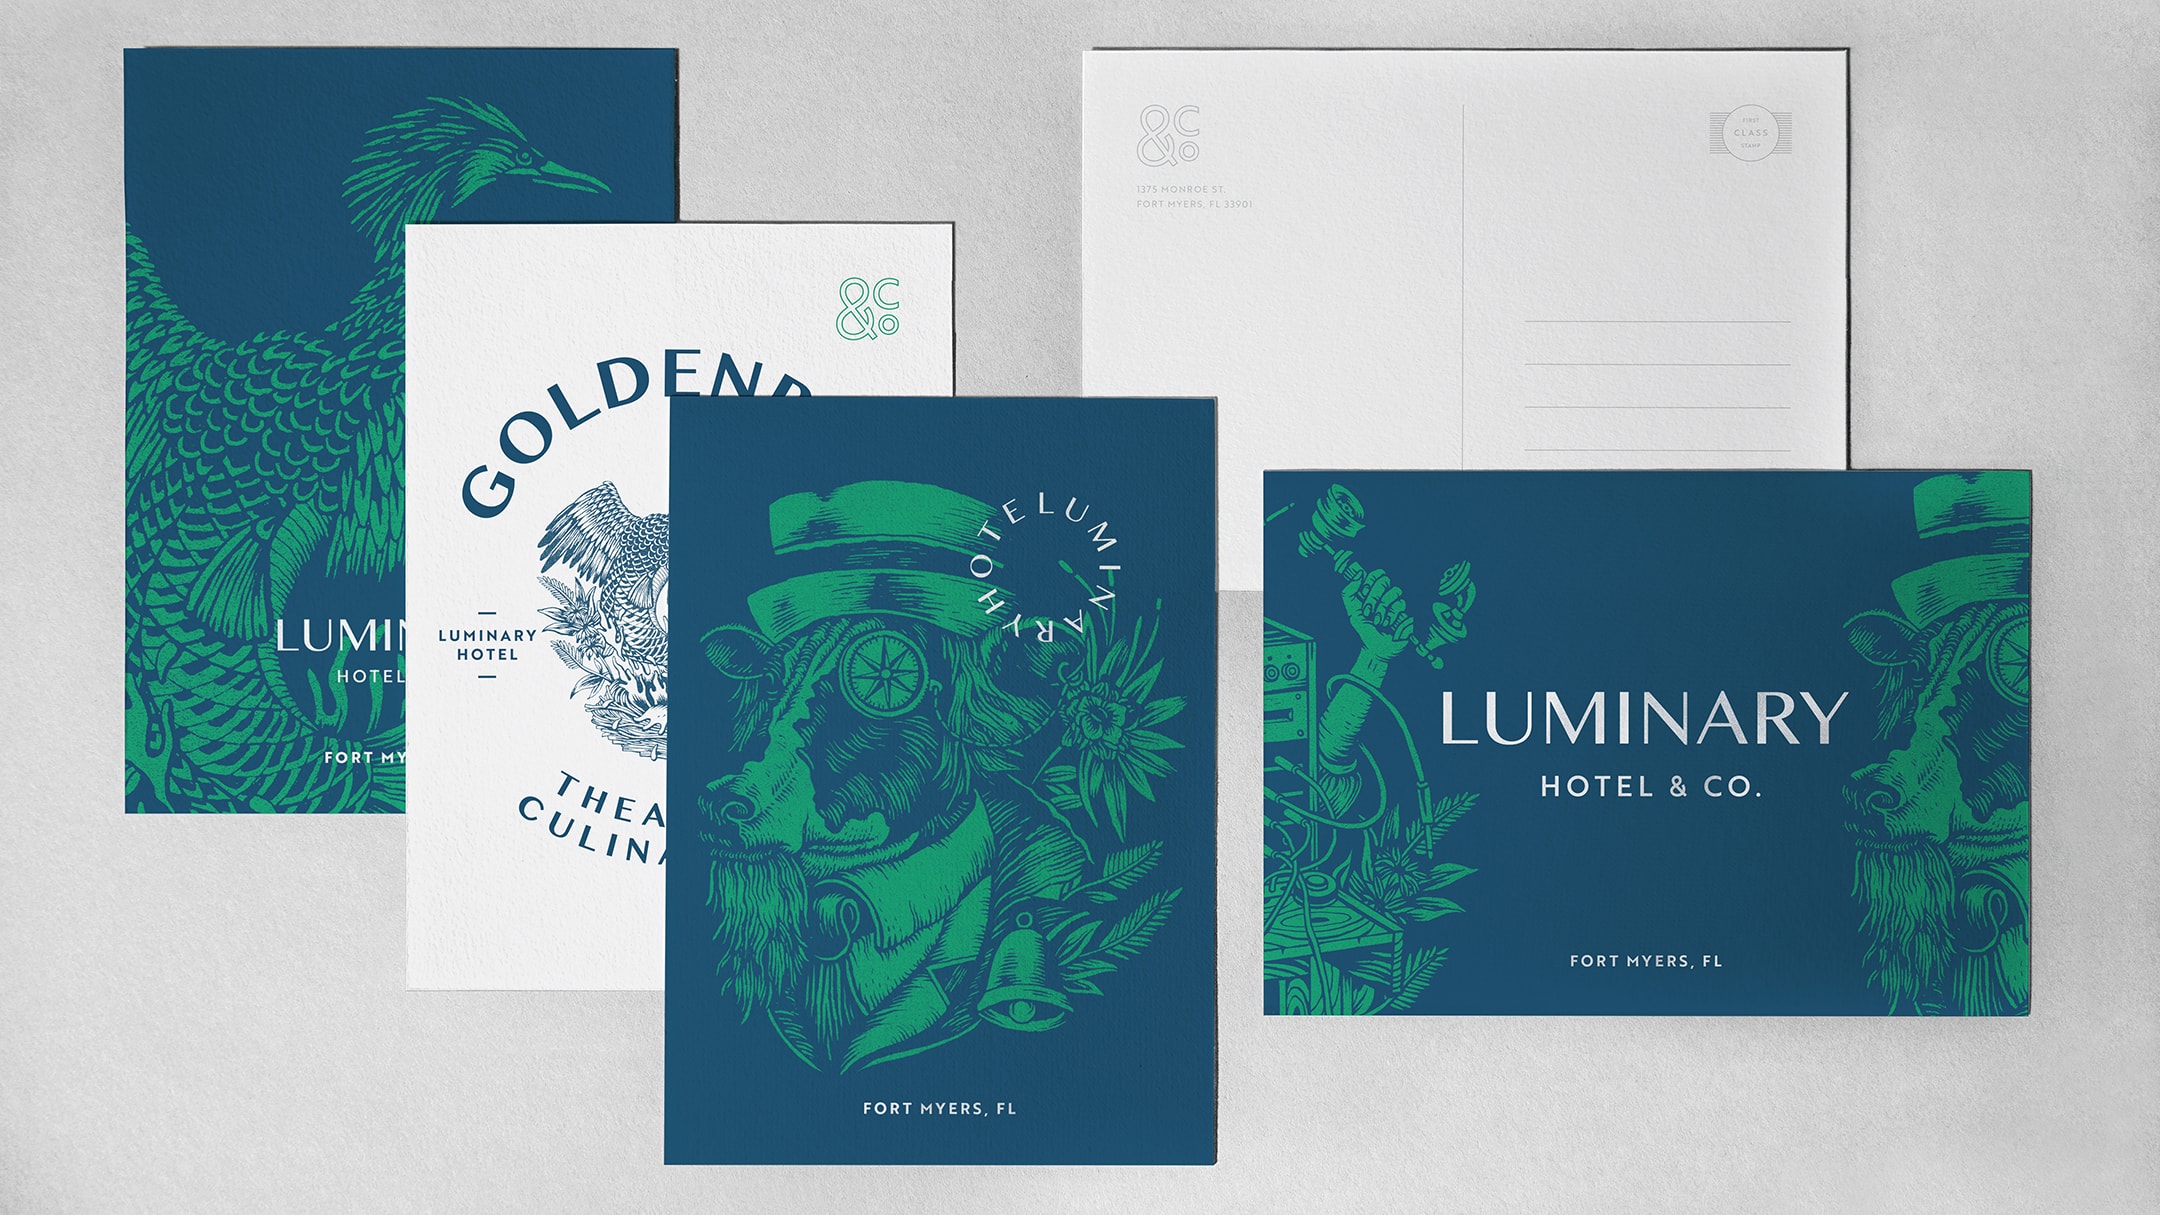 hotel branding work for luminary hotel and co - postcards